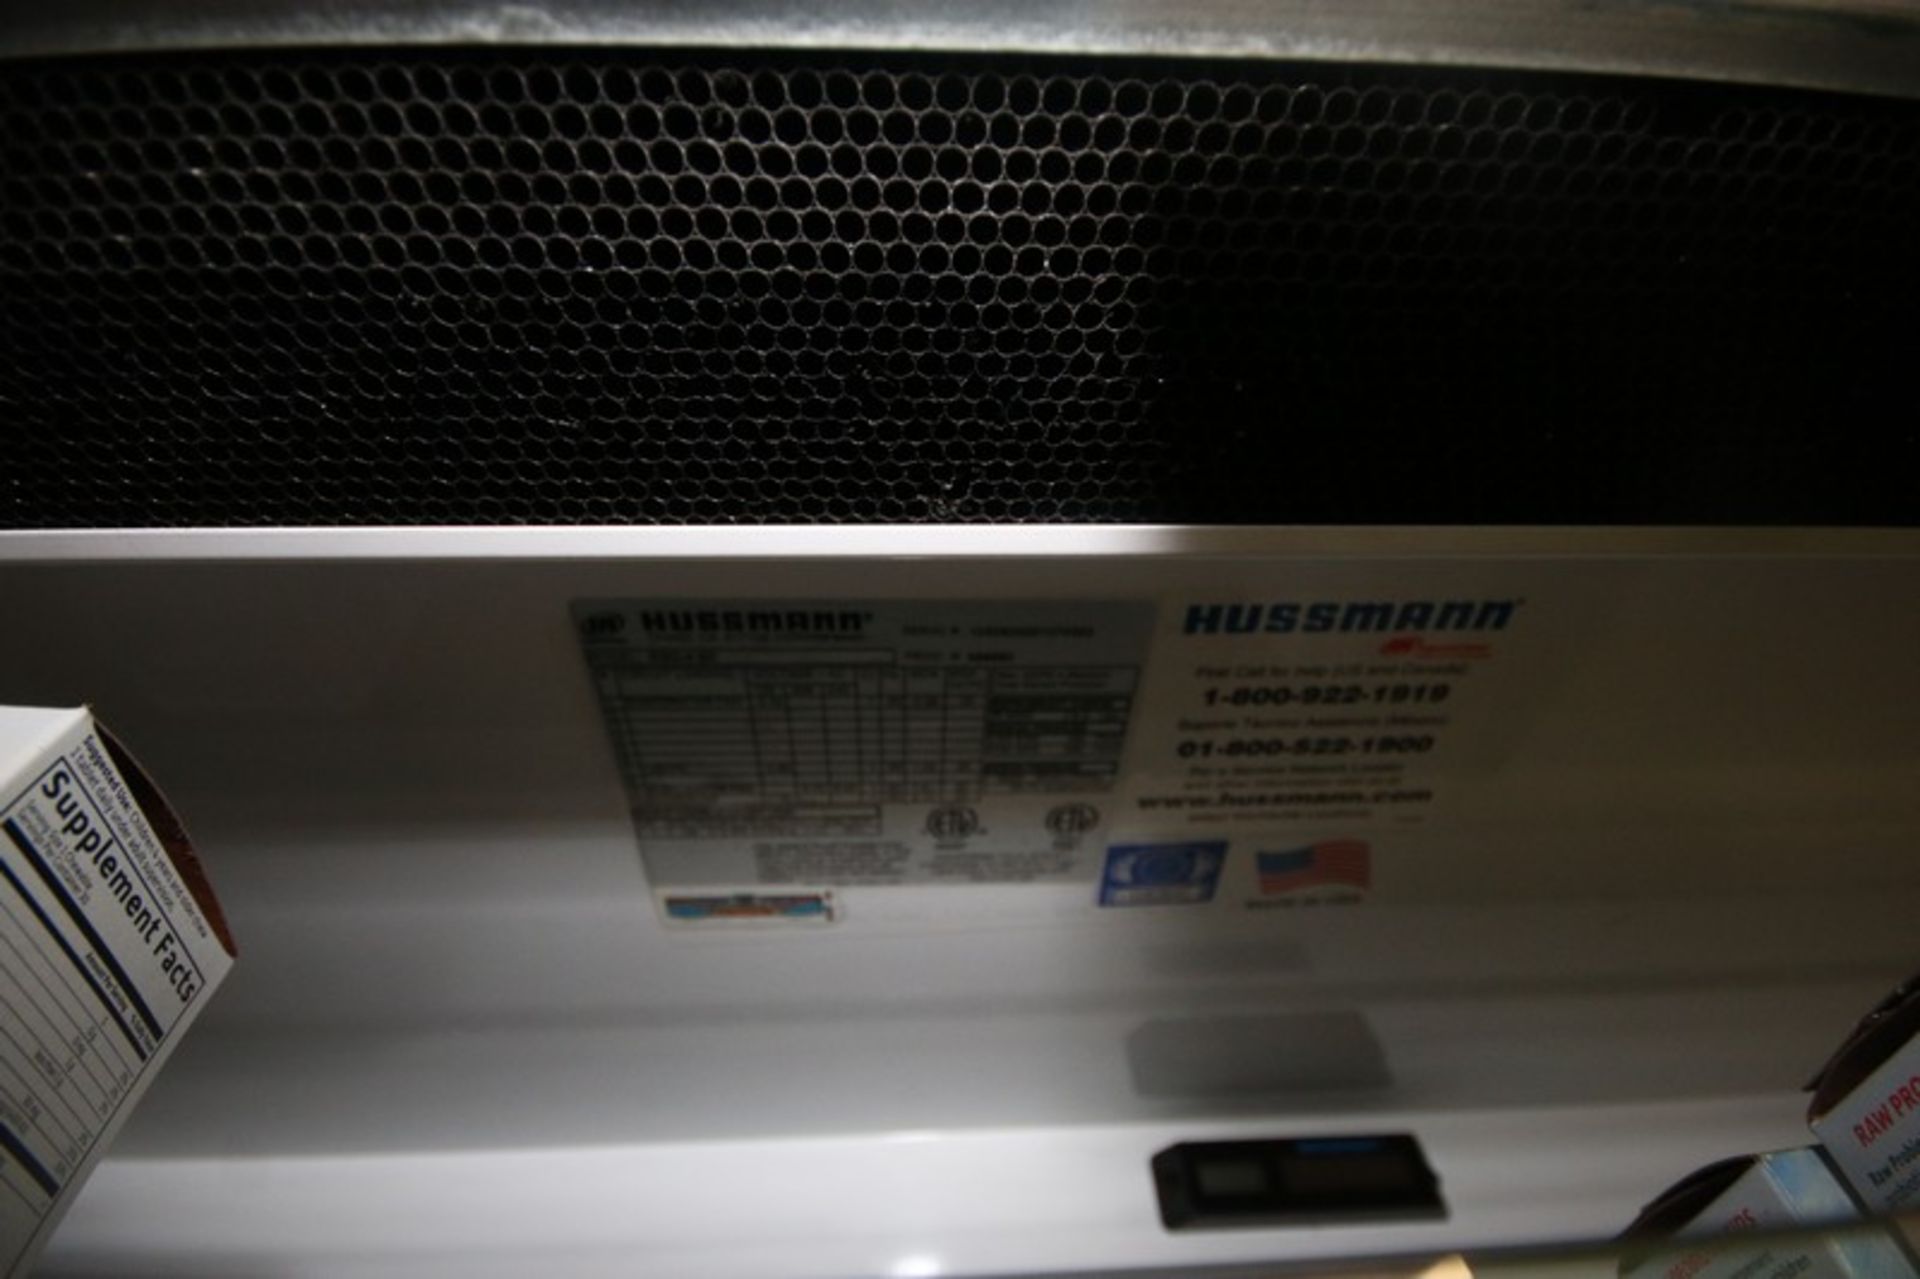 Hussman Open Refrigerator, M/N ROD-4-SC, S/N 1030923201074302, Overall Dims.: Aprox. 50-1/2" L x 24" - Image 5 of 8